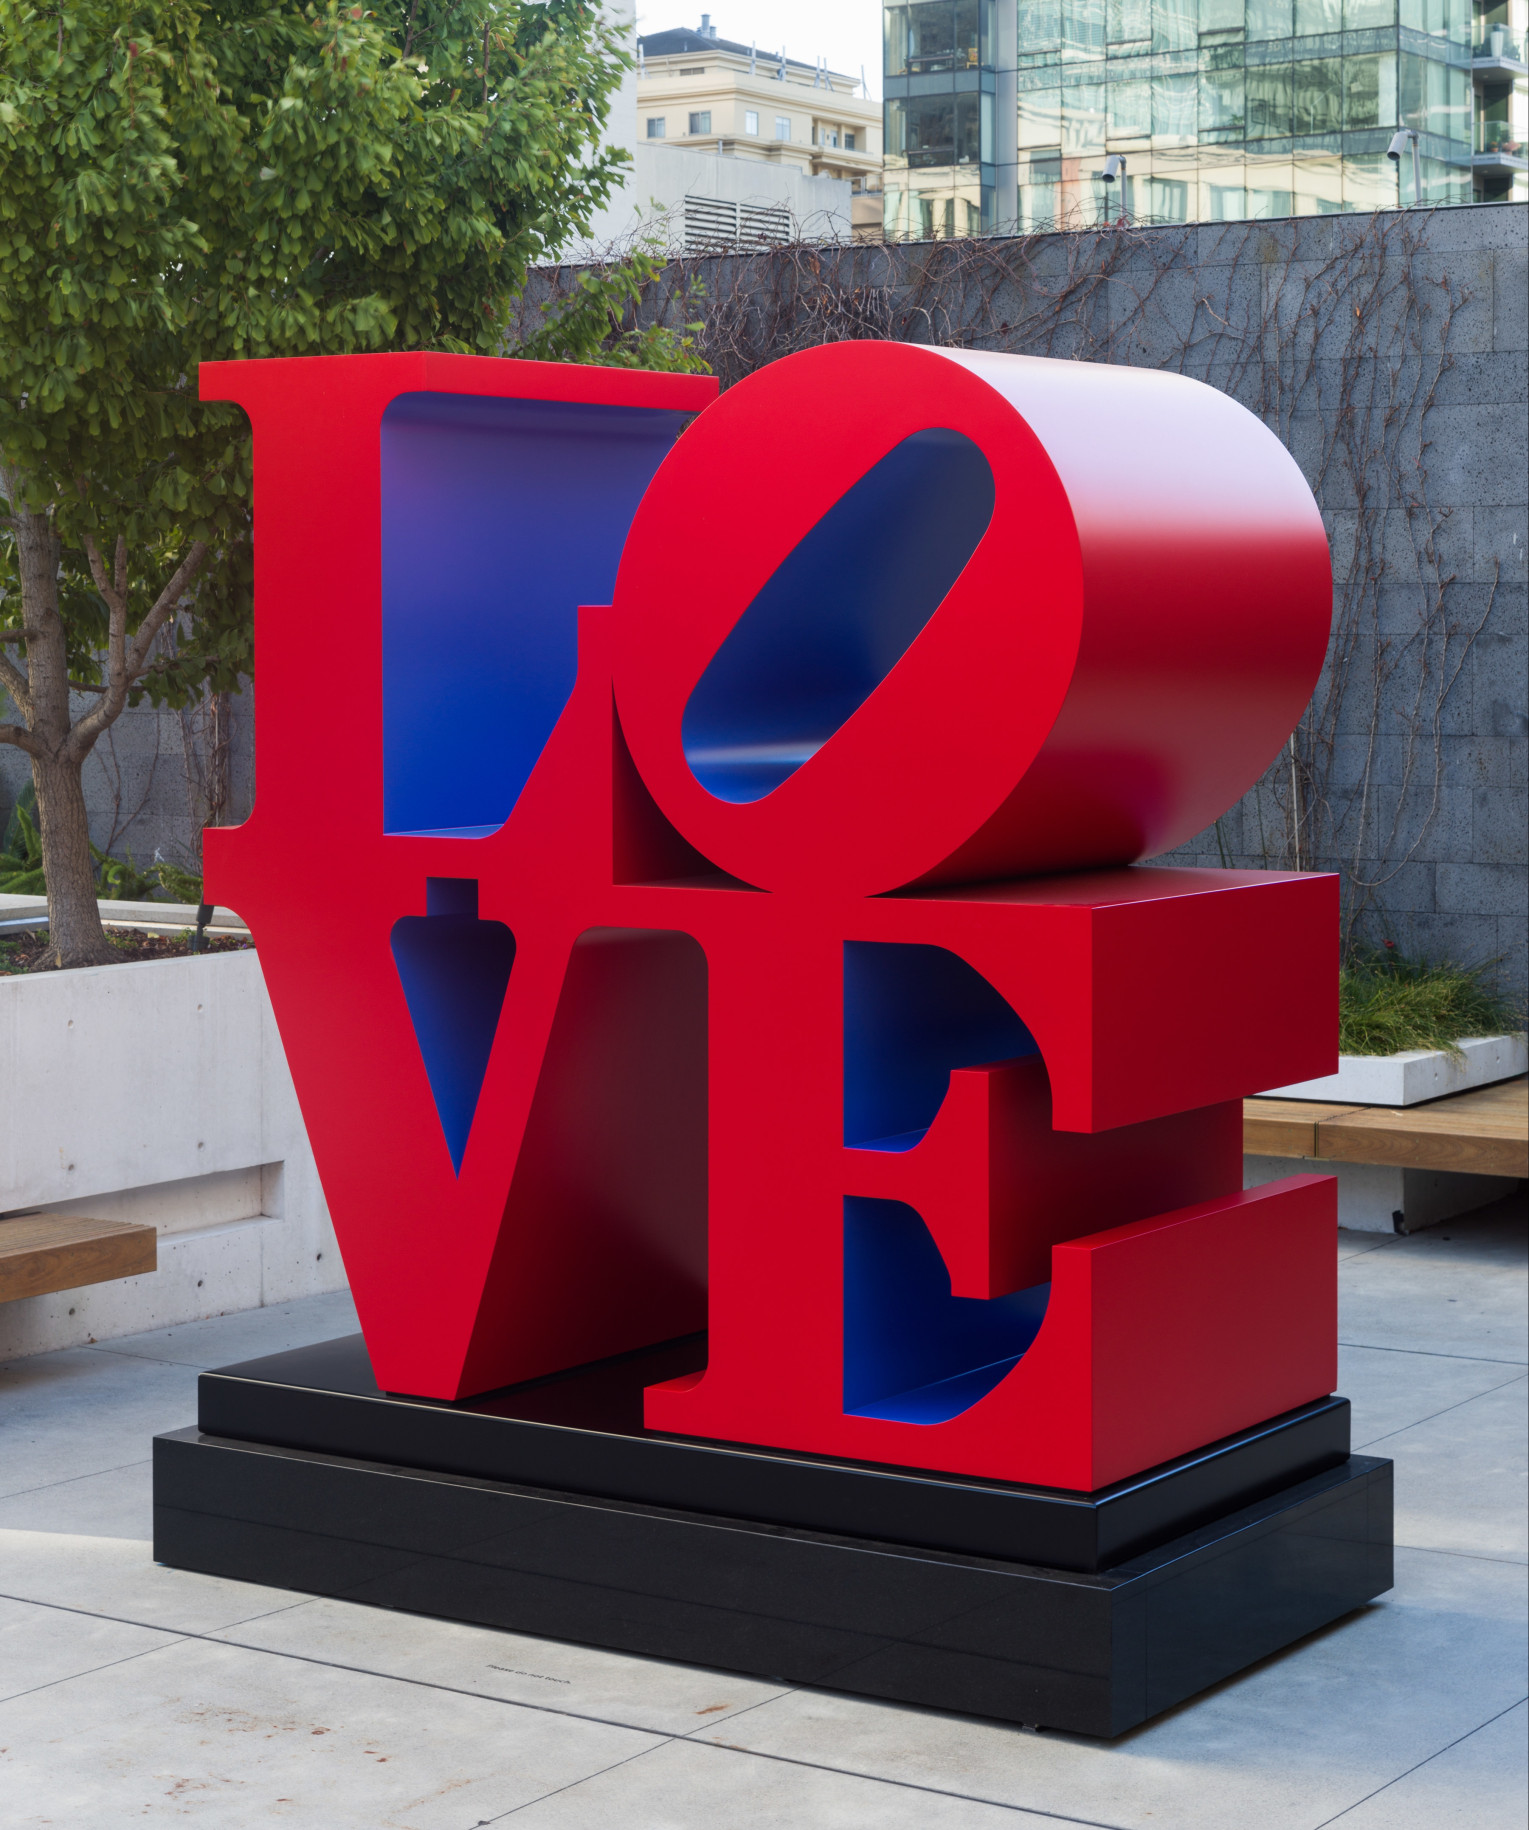 A 96 by 96 by 48 inch polychrome aluminum sculpture spelling love, consisting the letters L and a tilted letter O on top of the letters V and E. The outsides of the letters are red, and the insides are violet.